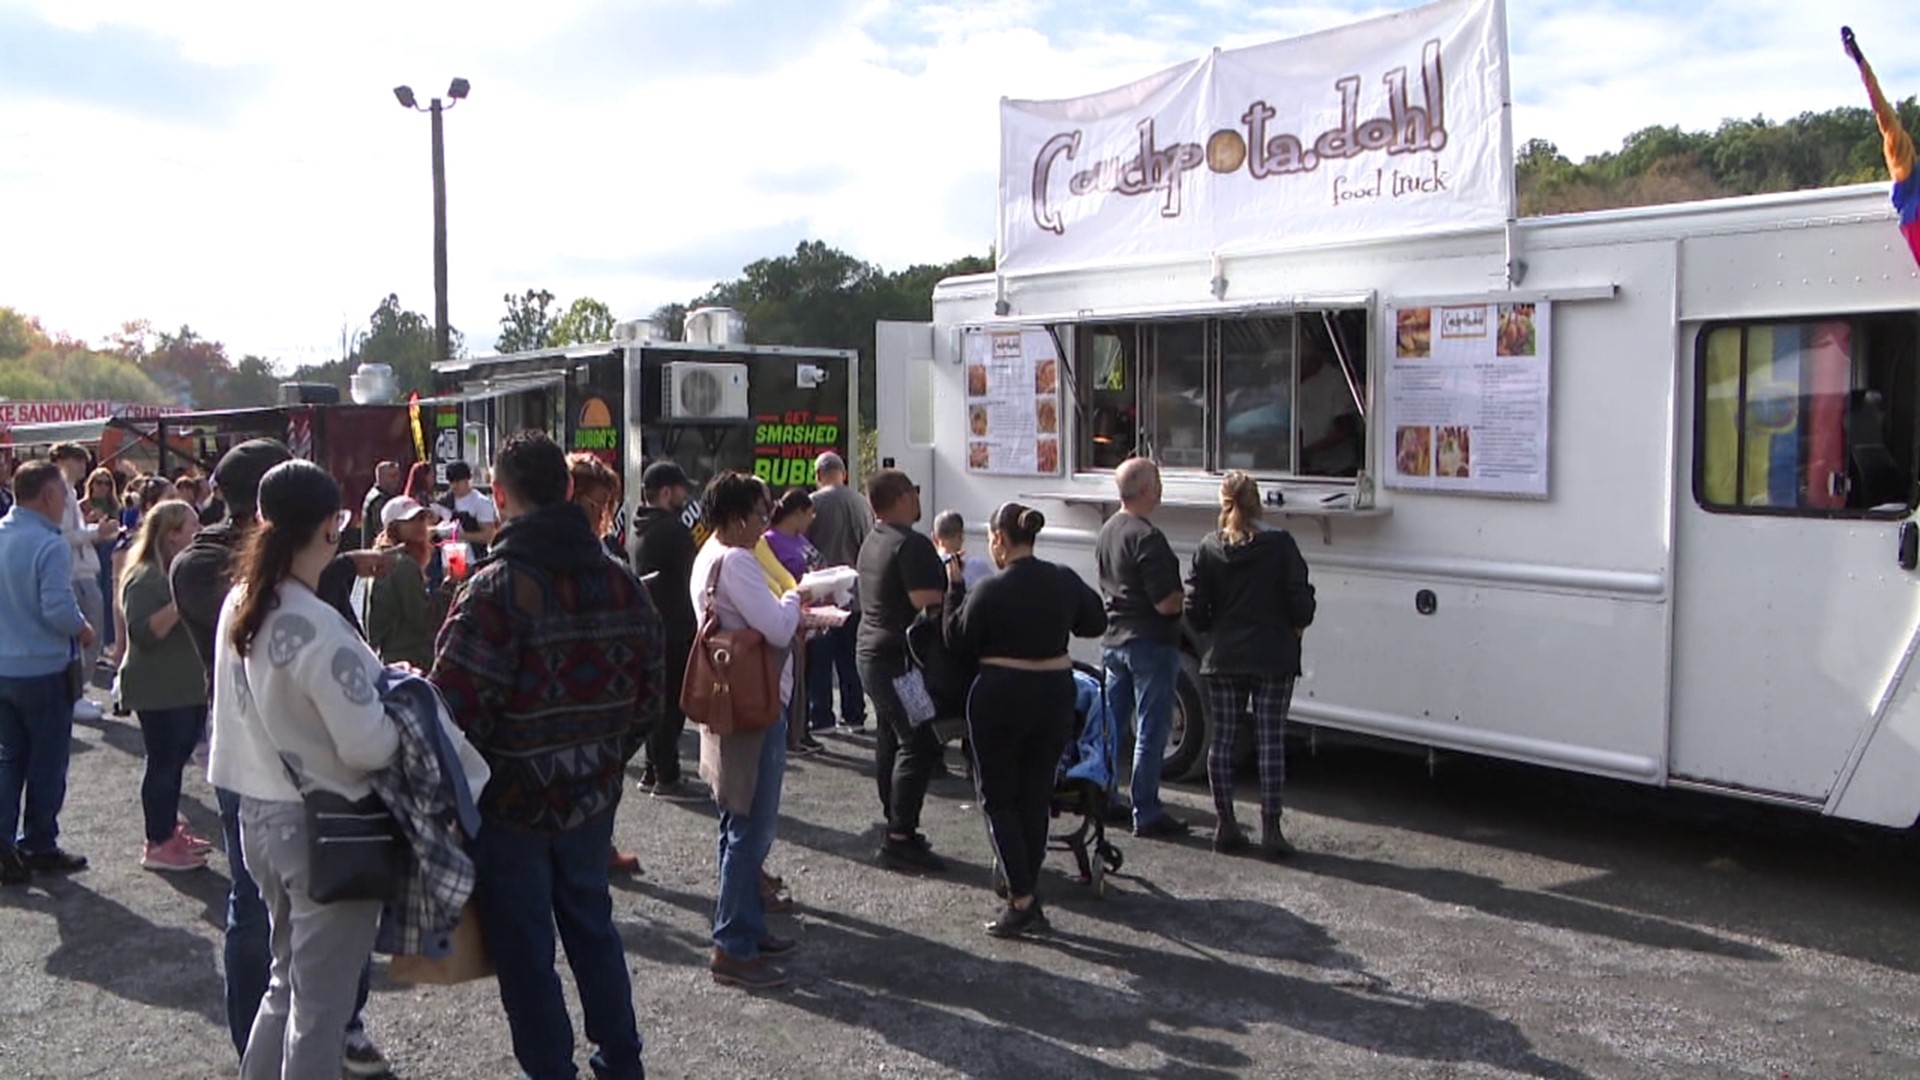 It's a weekend of food brought to you on four wheels. Newswatch 16's Emily Kress takes us to monroe county for the Pocono Food Truck Festival.